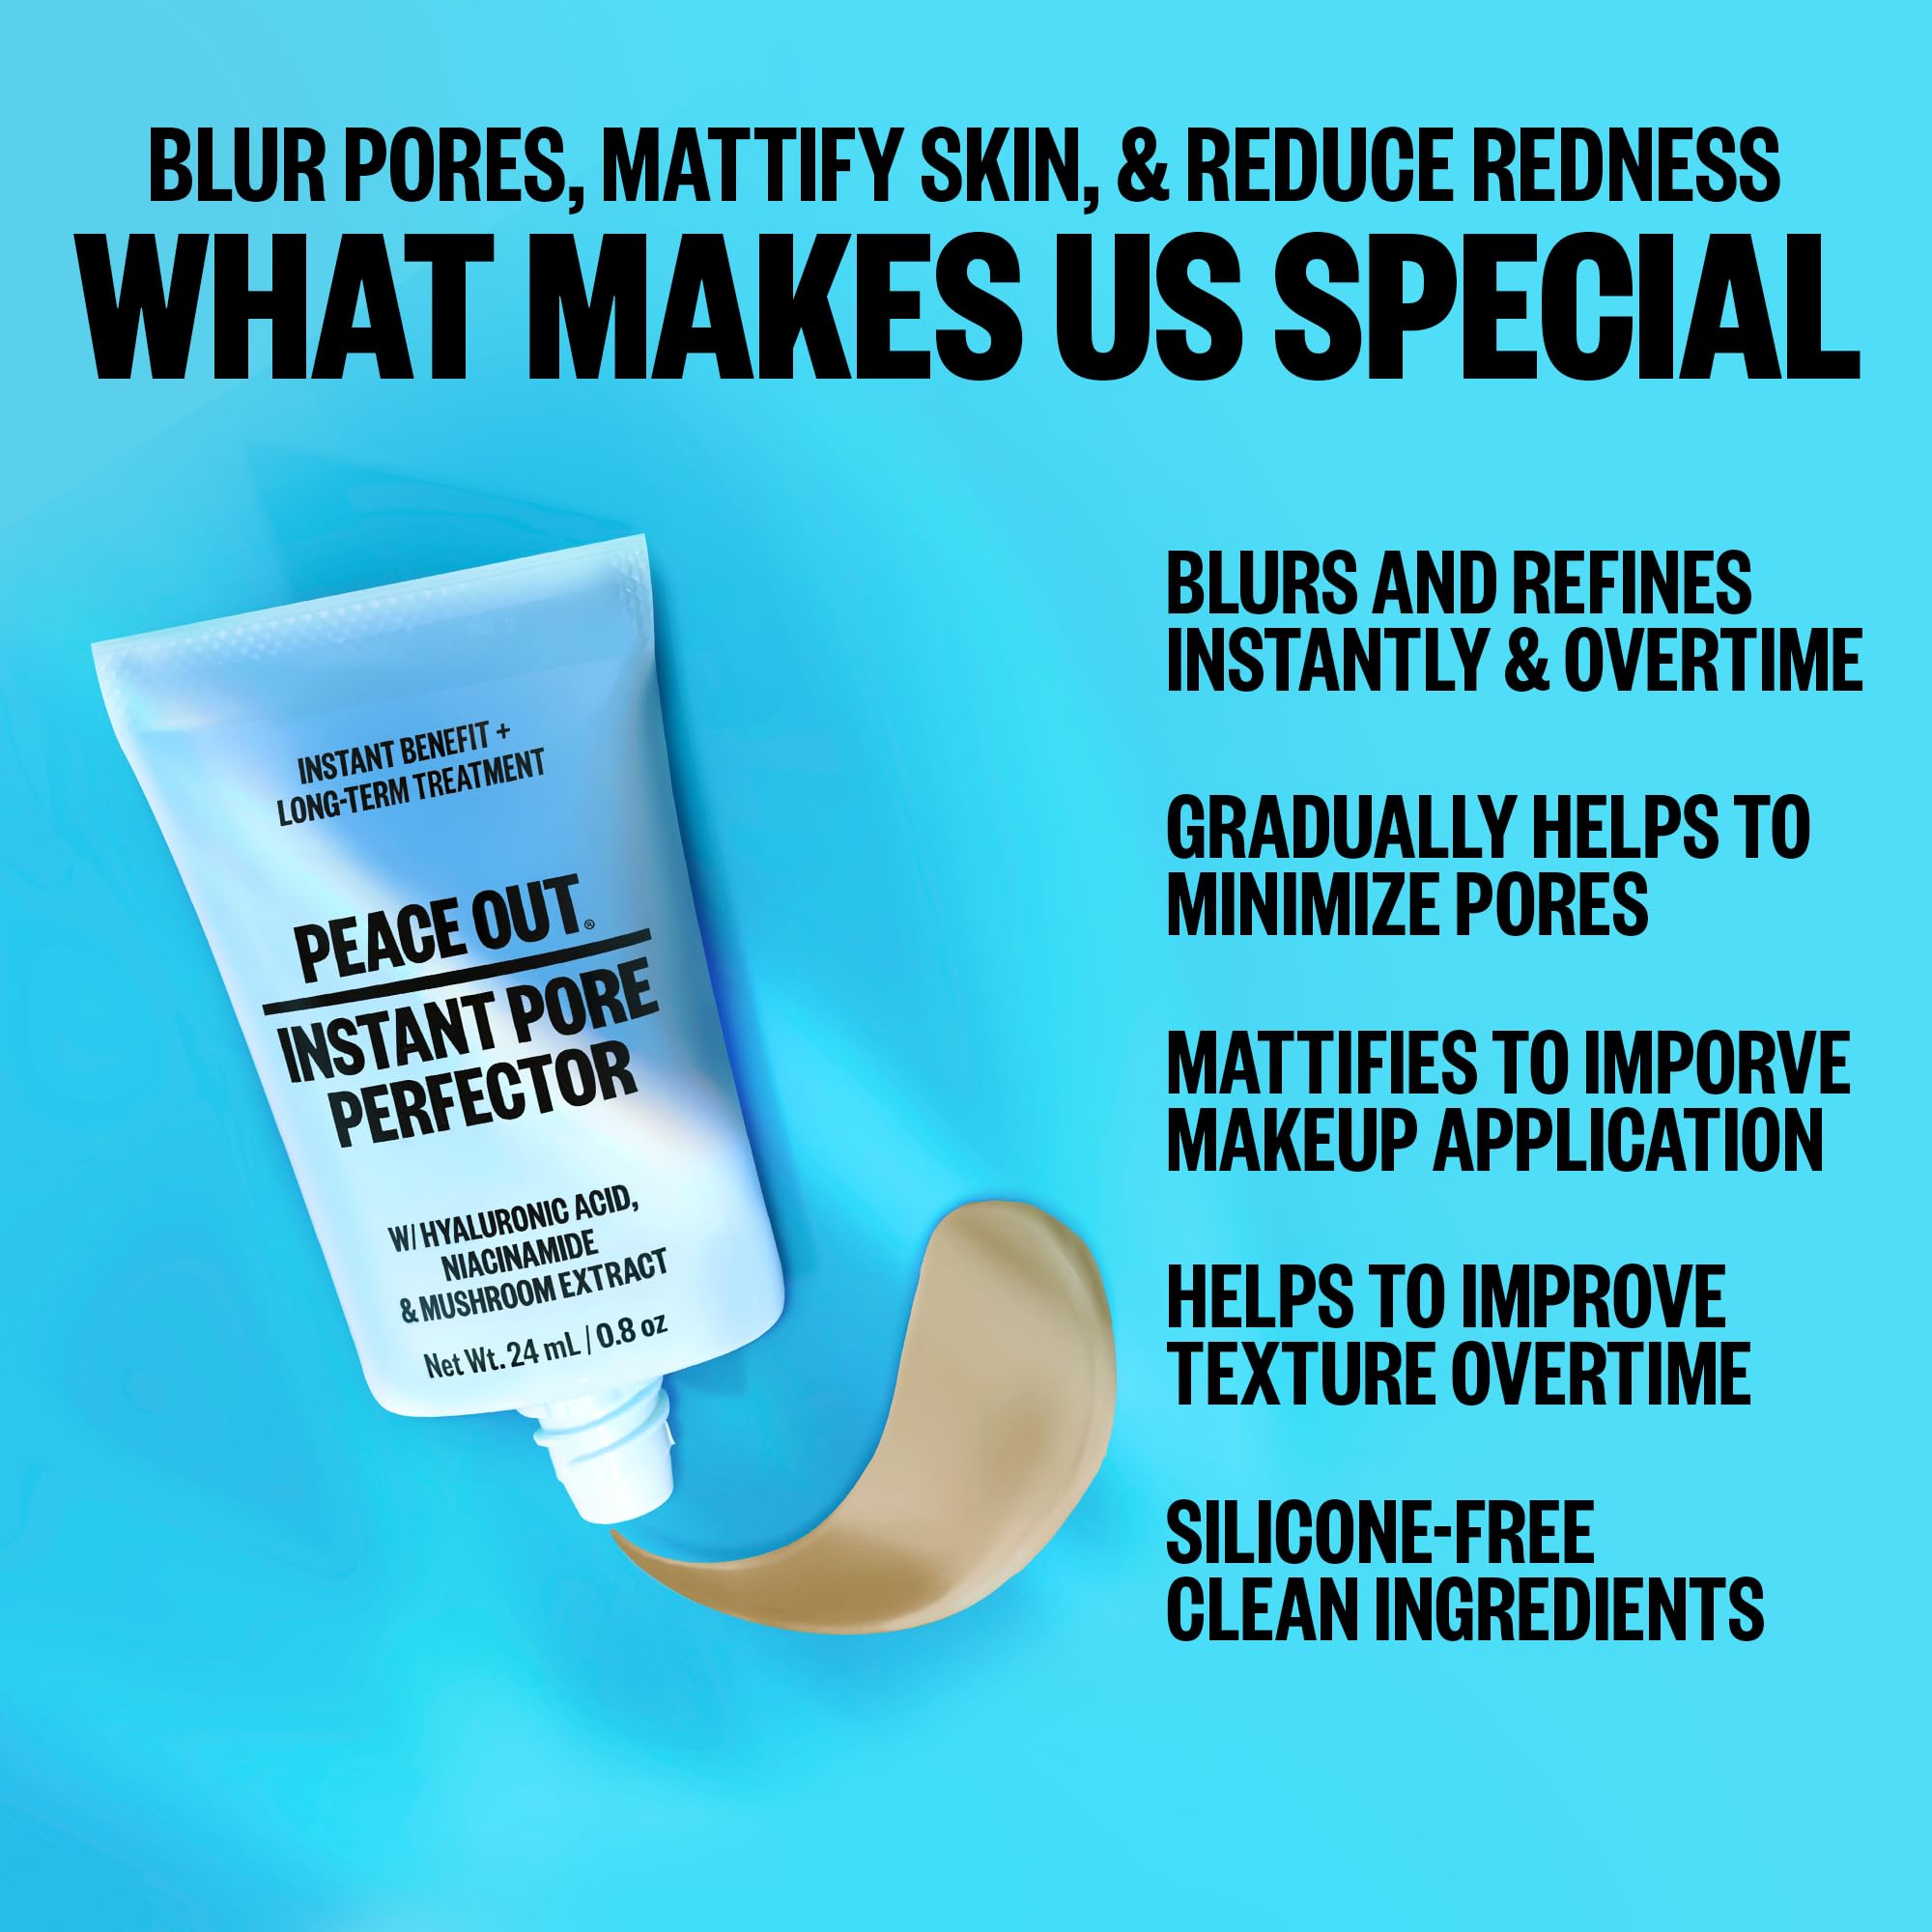 Peace Out Skincare Instant Pore Perfector, Skin Primer to Blur Pores, Reduce Redness and Extend Makeup Wear, Instant Filter Finish, Hyaluronic Acid and Niacinamide, Silicone-Free, 0.8 Oz